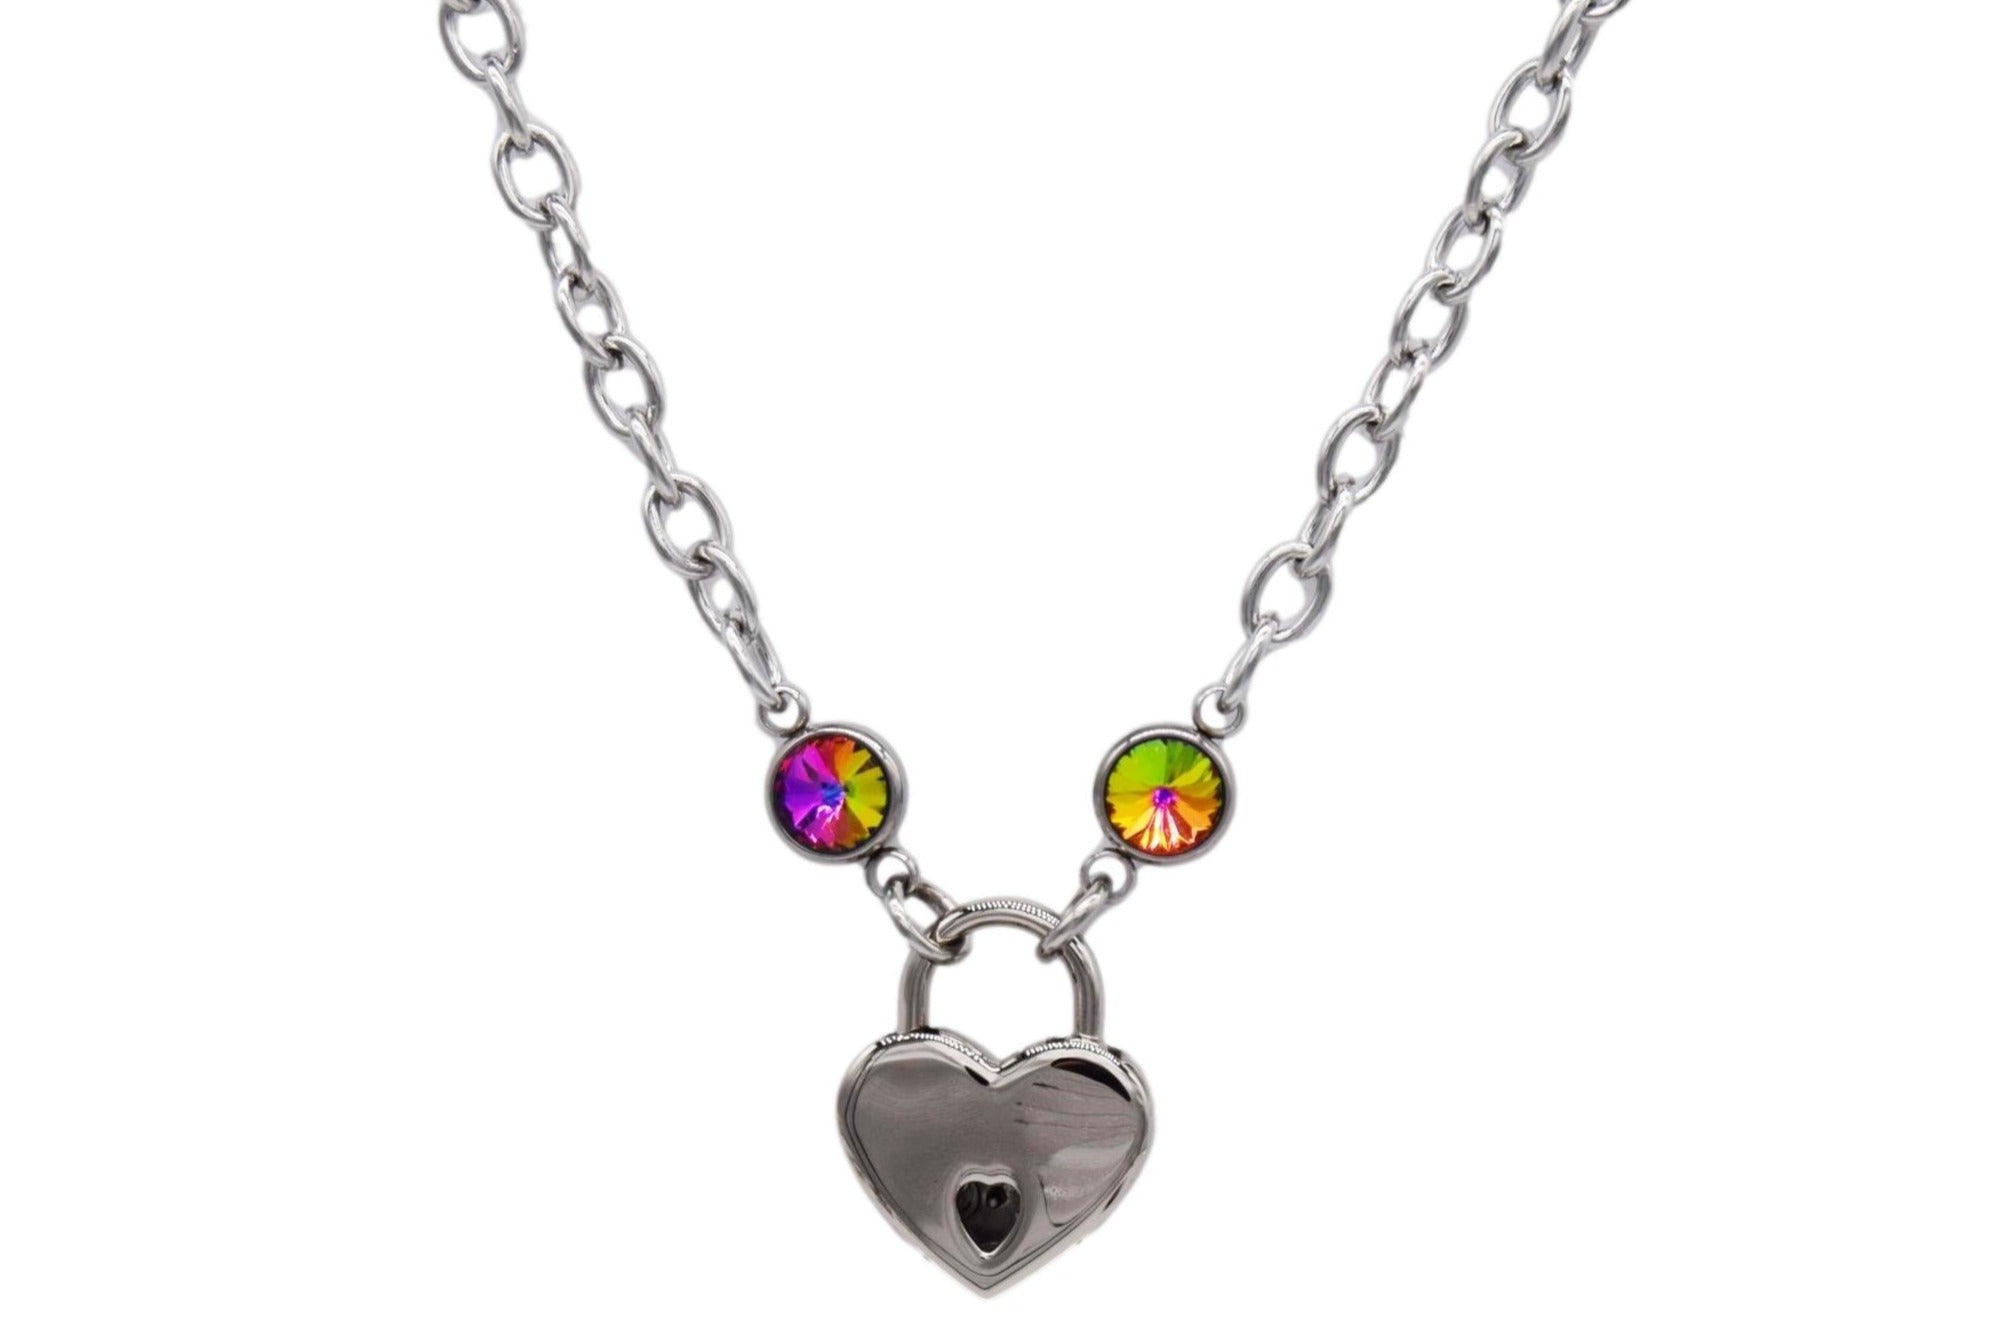 BDSM Locking Day Collar Jewelry Necklace of Lock and O ring with a rainbow cz crystal available in solid 316L Stainless Steel or 925 sterling silver shown on a white background